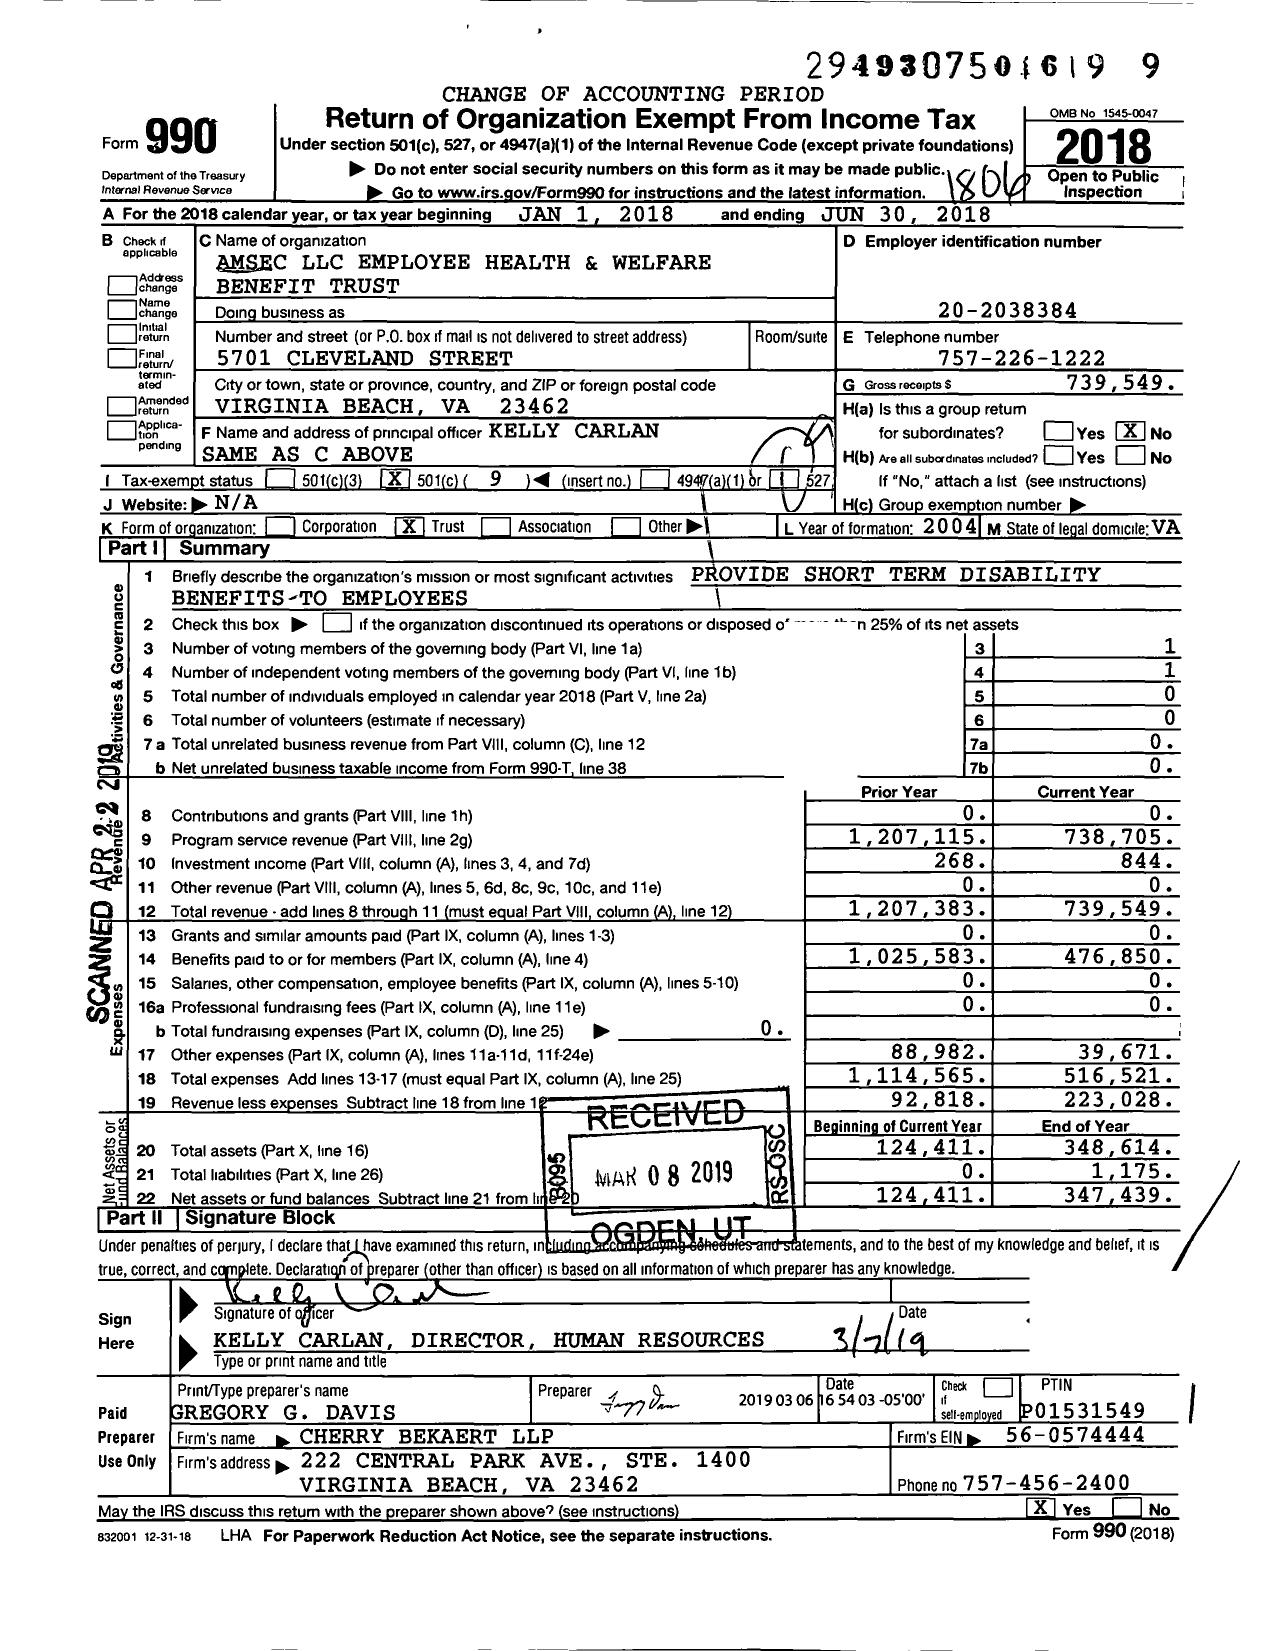 Image of first page of 2017 Form 990O for AMSEC LLC Employee Health and Welfare Benefit Trust